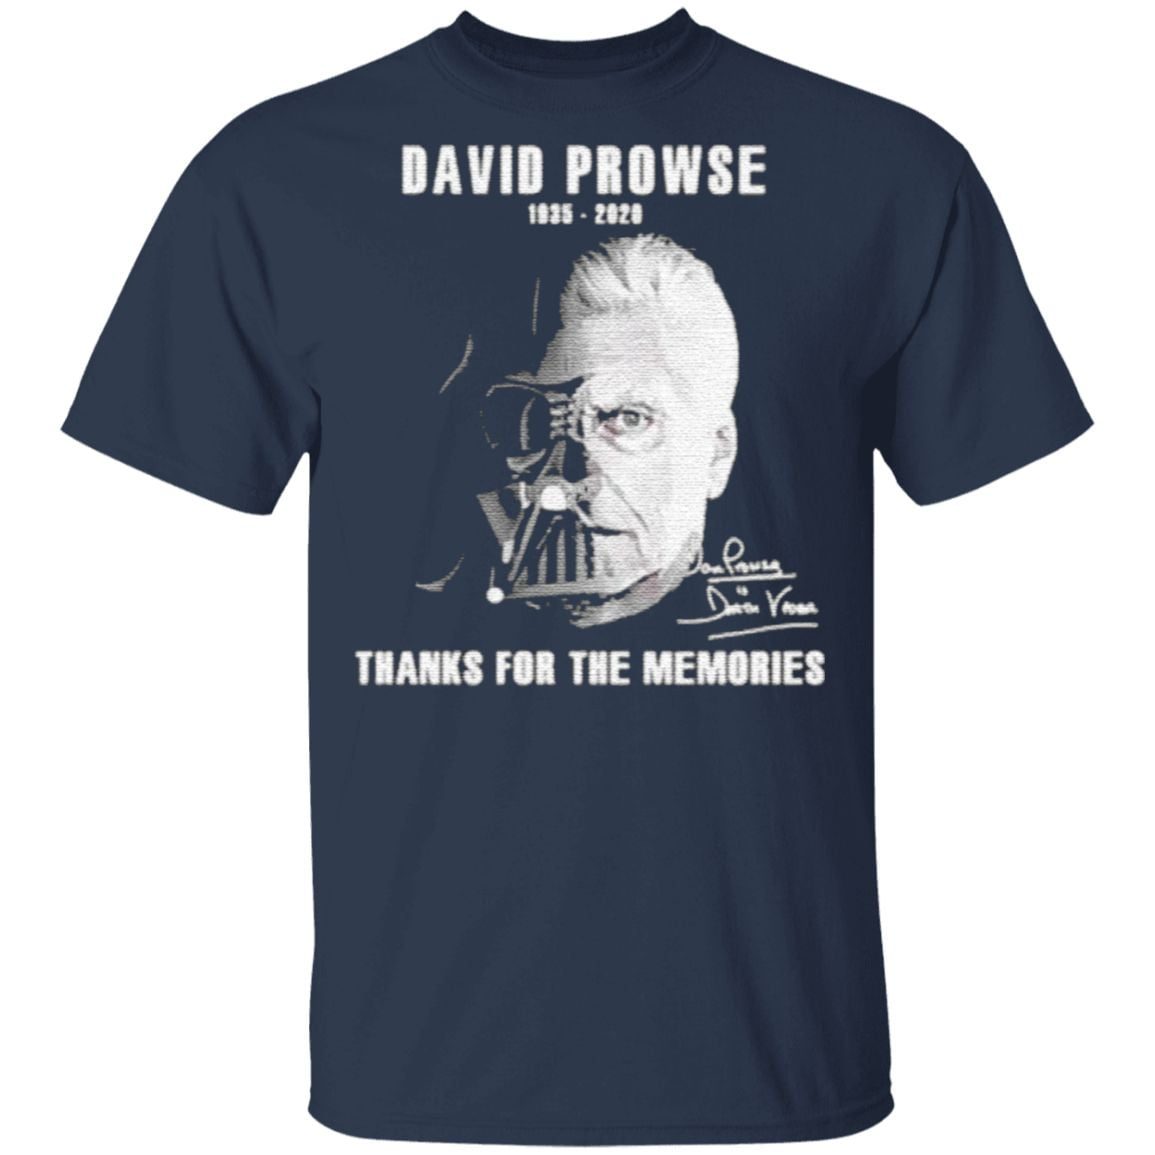 David Prowse 1935 2020 Signature Thanks For The Memories T Shirt